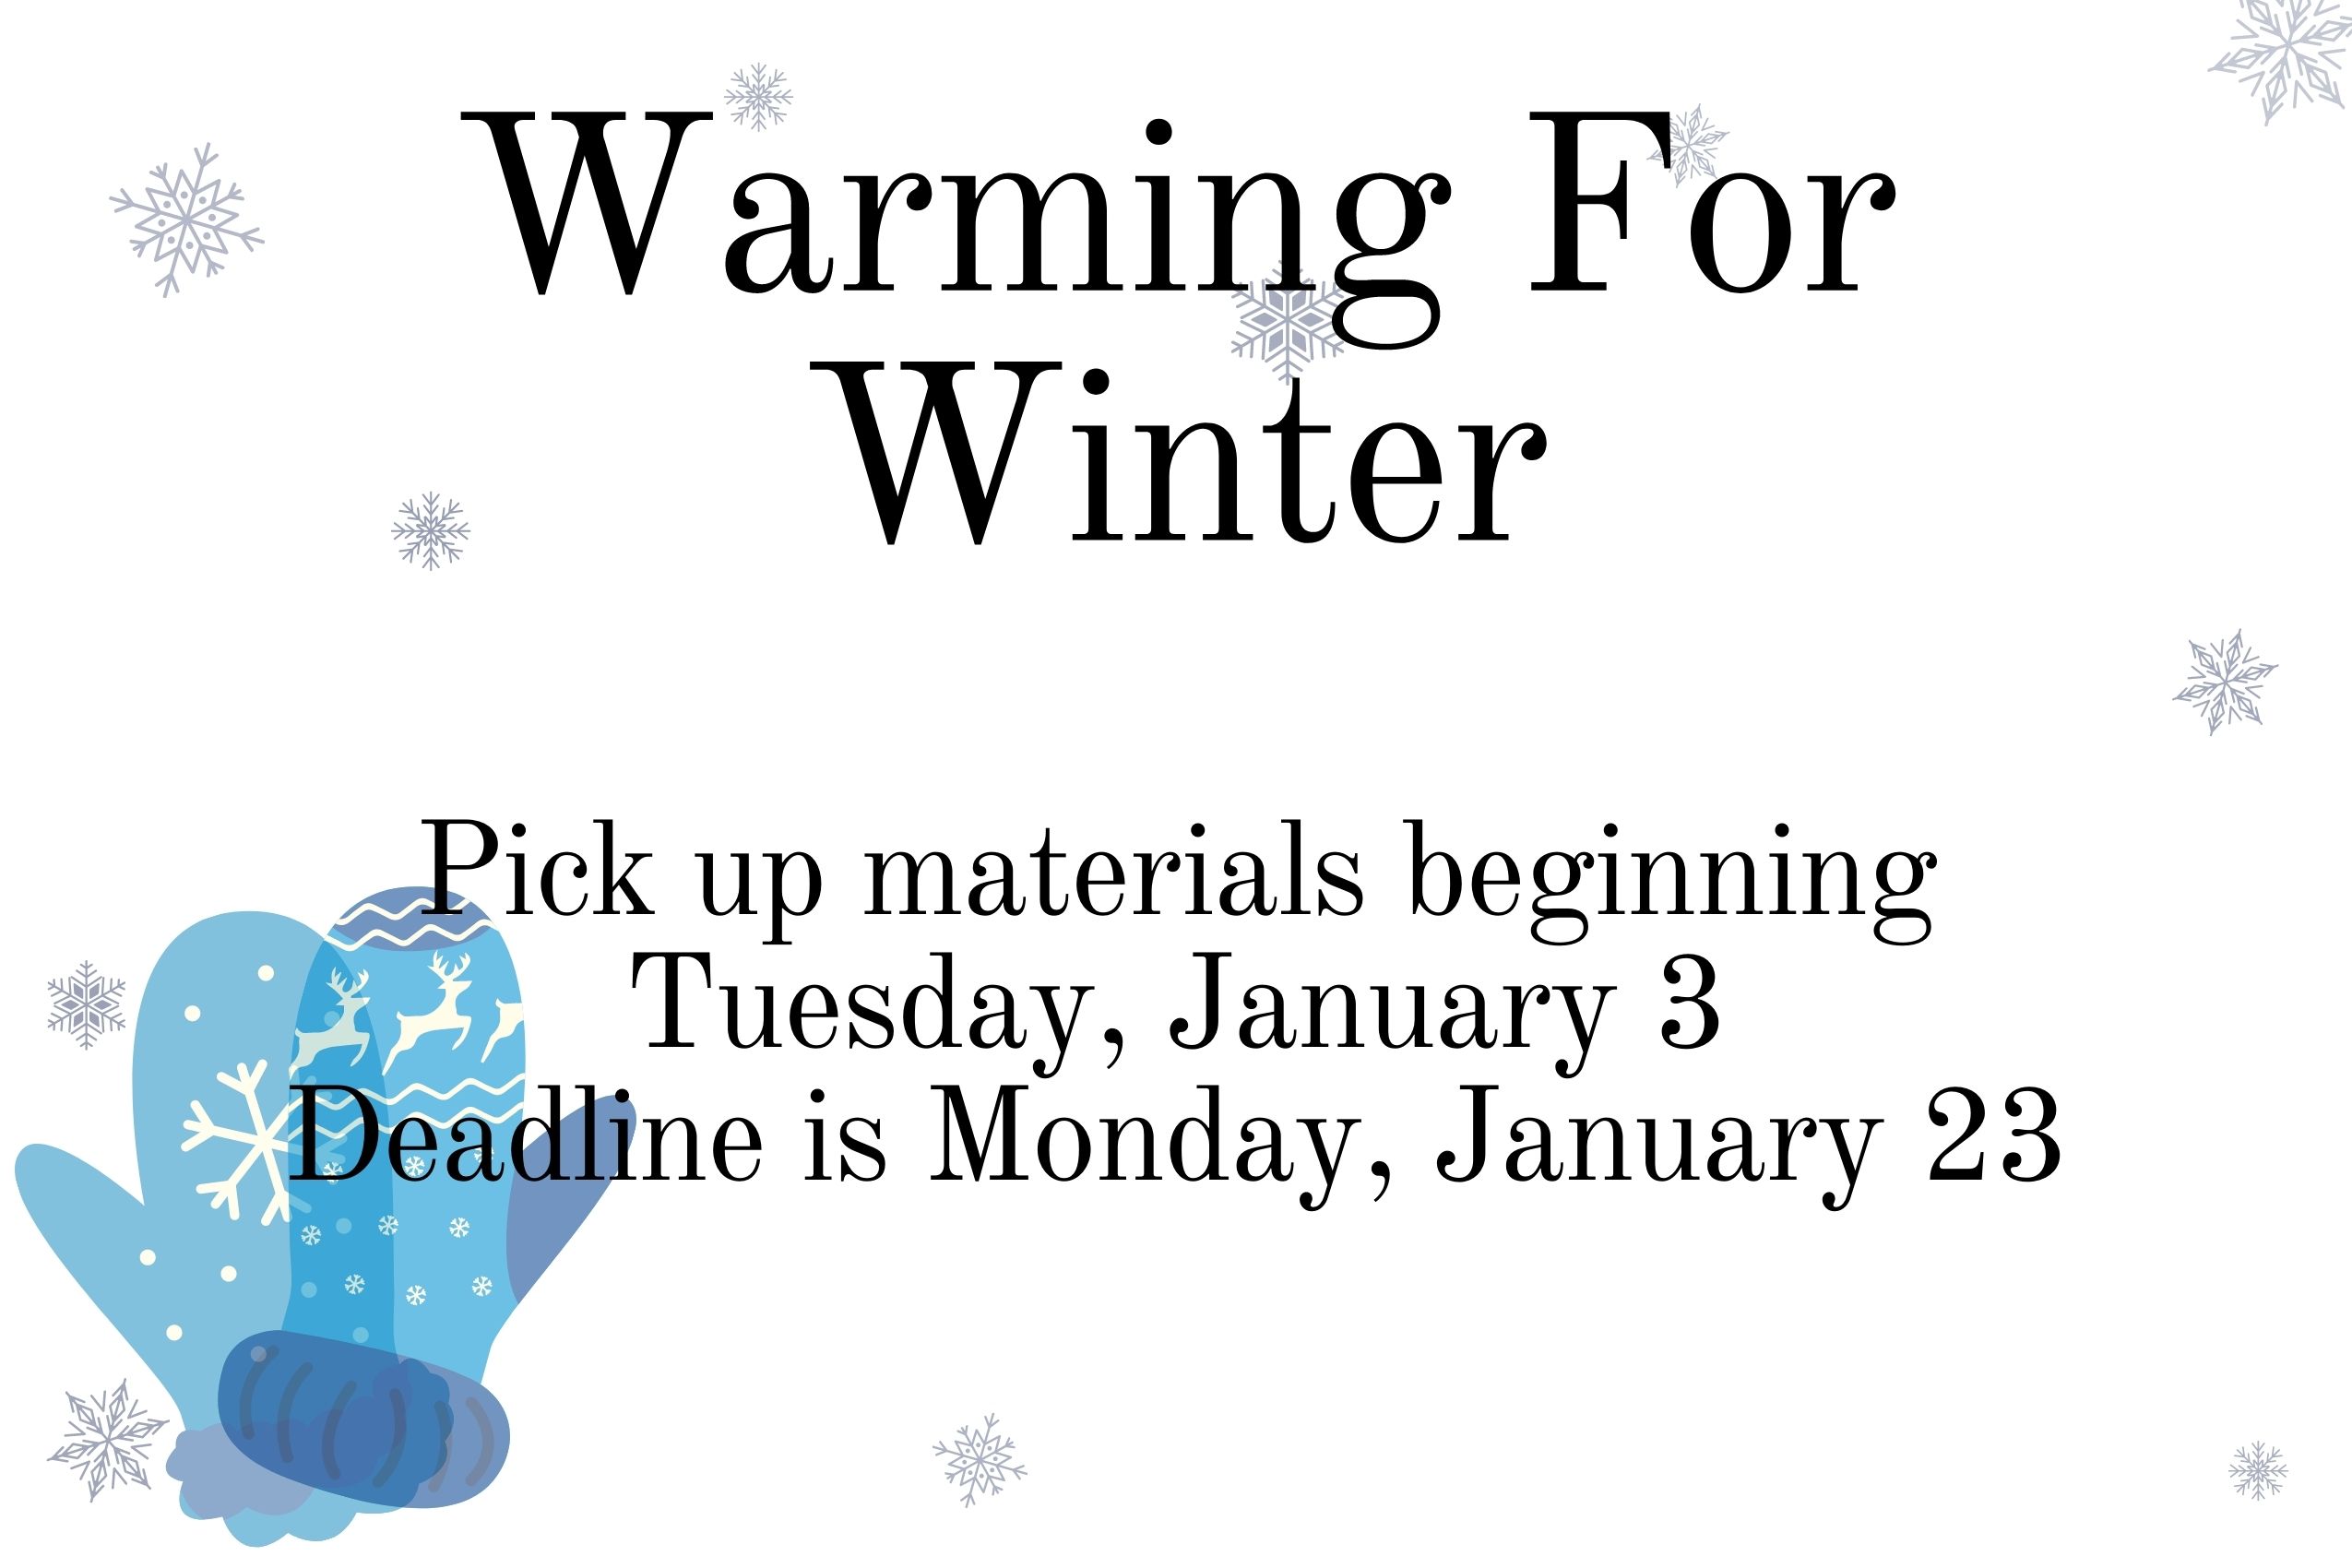 Graphic of blue mittens. Top Text: Warming For Winter. Bottom Text: Pick up materials beginning Tuesday, January 3. Deadline is Monday, January 23.